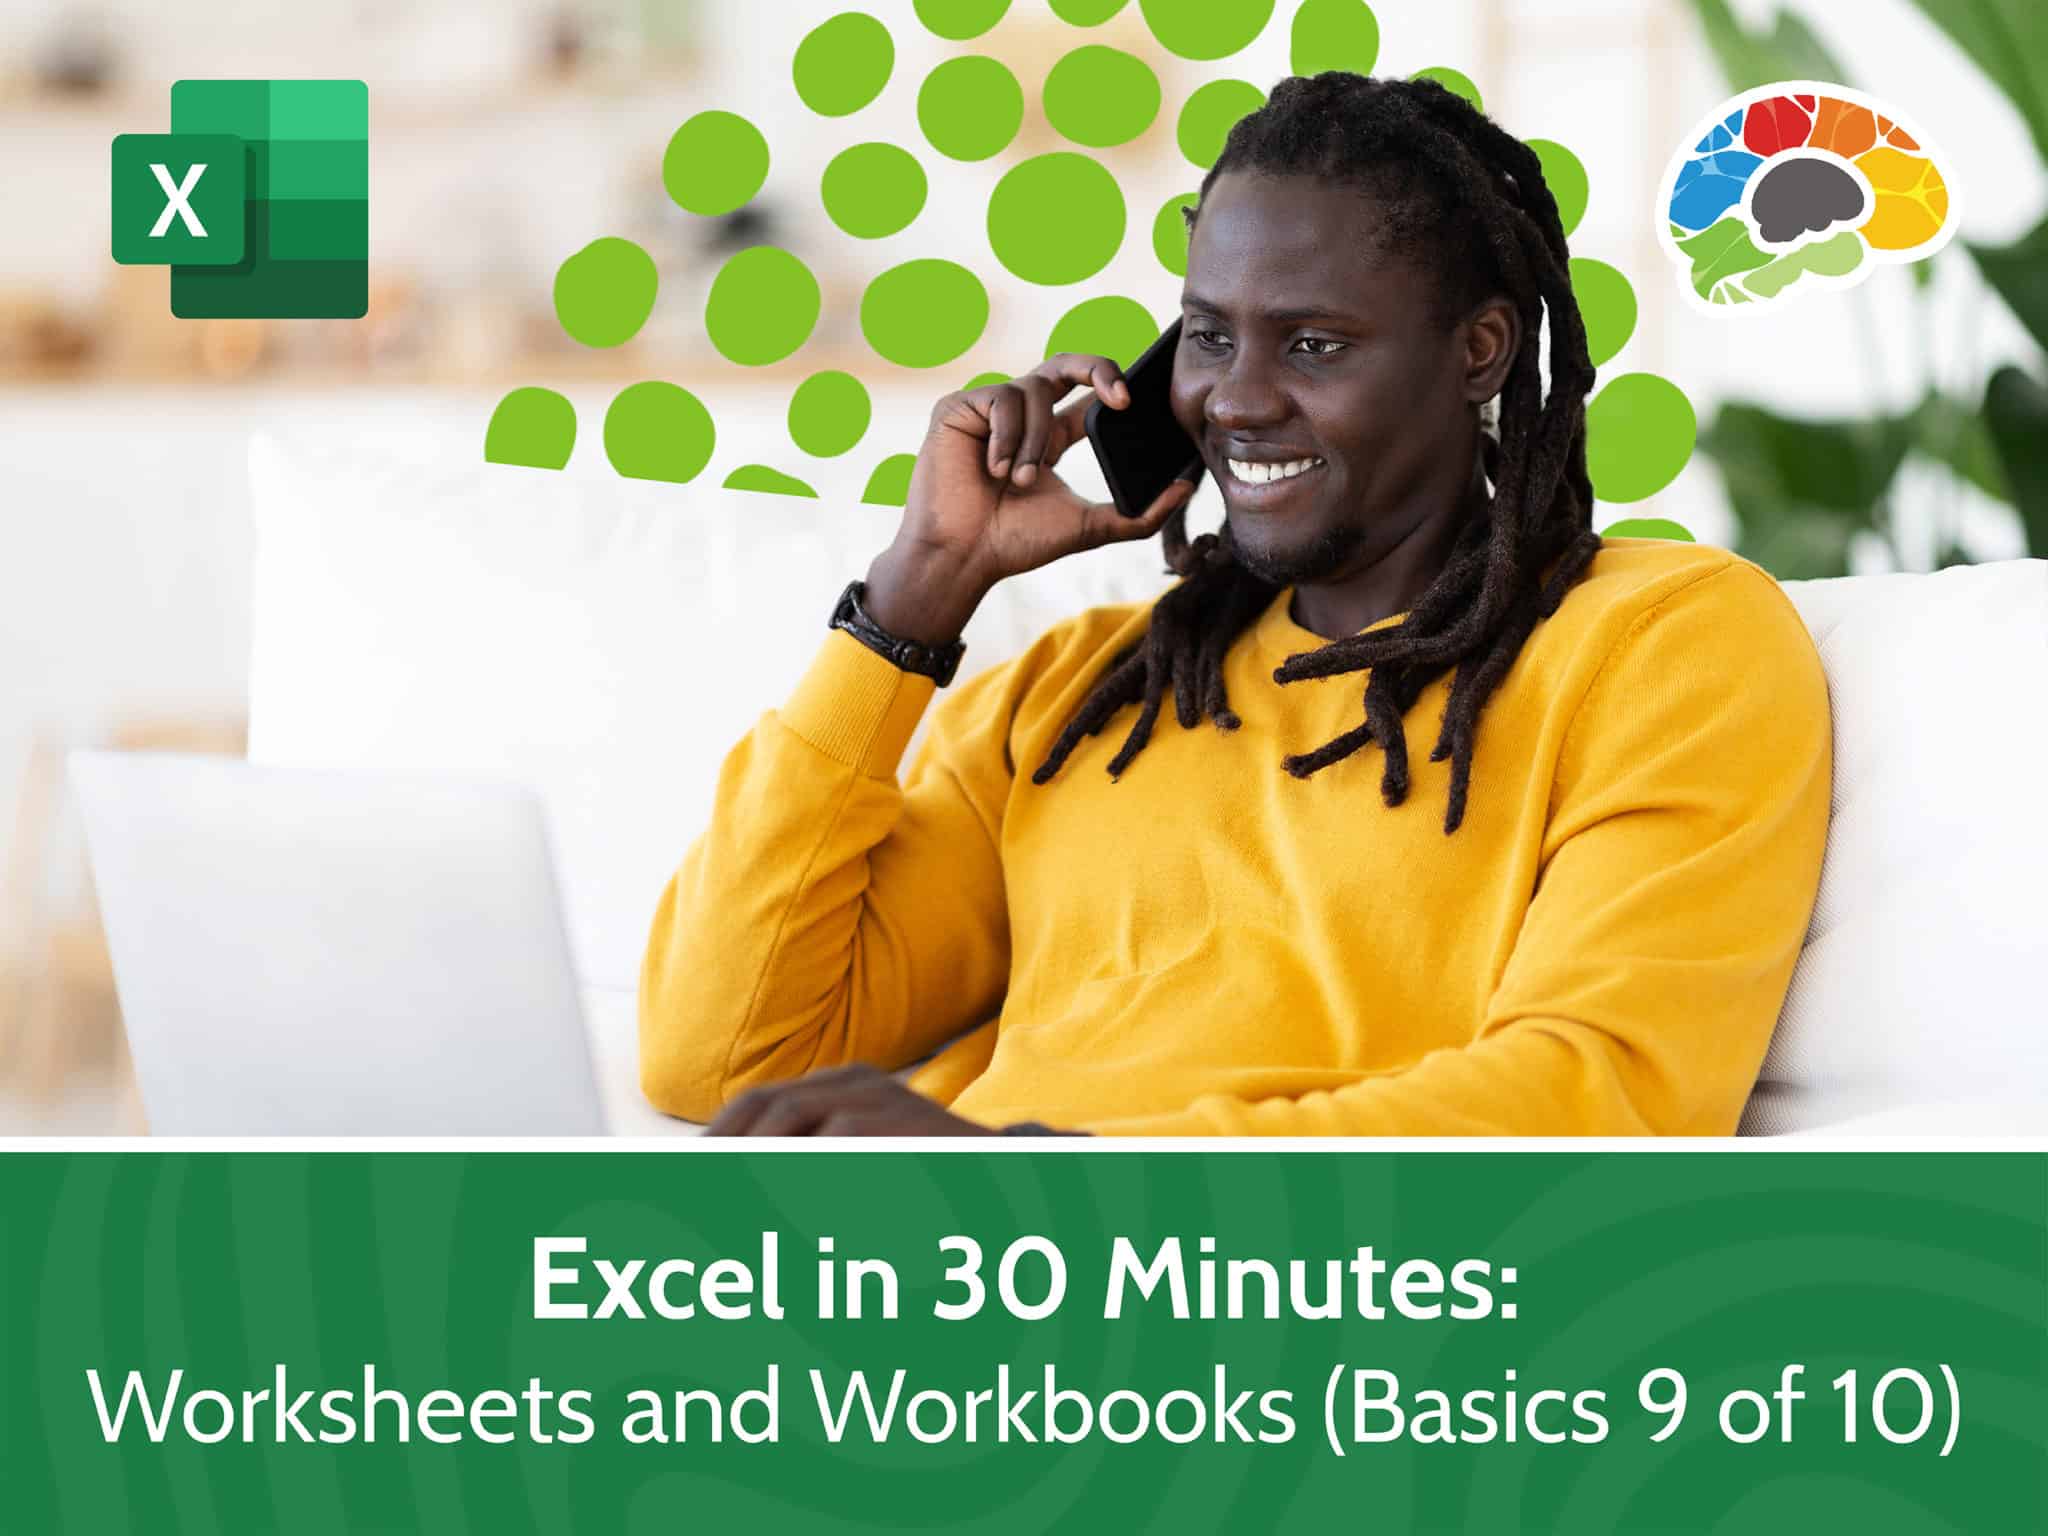 Excel in 30 Minutes Worksheets and Workbooks Basics 9 of 10 scaled